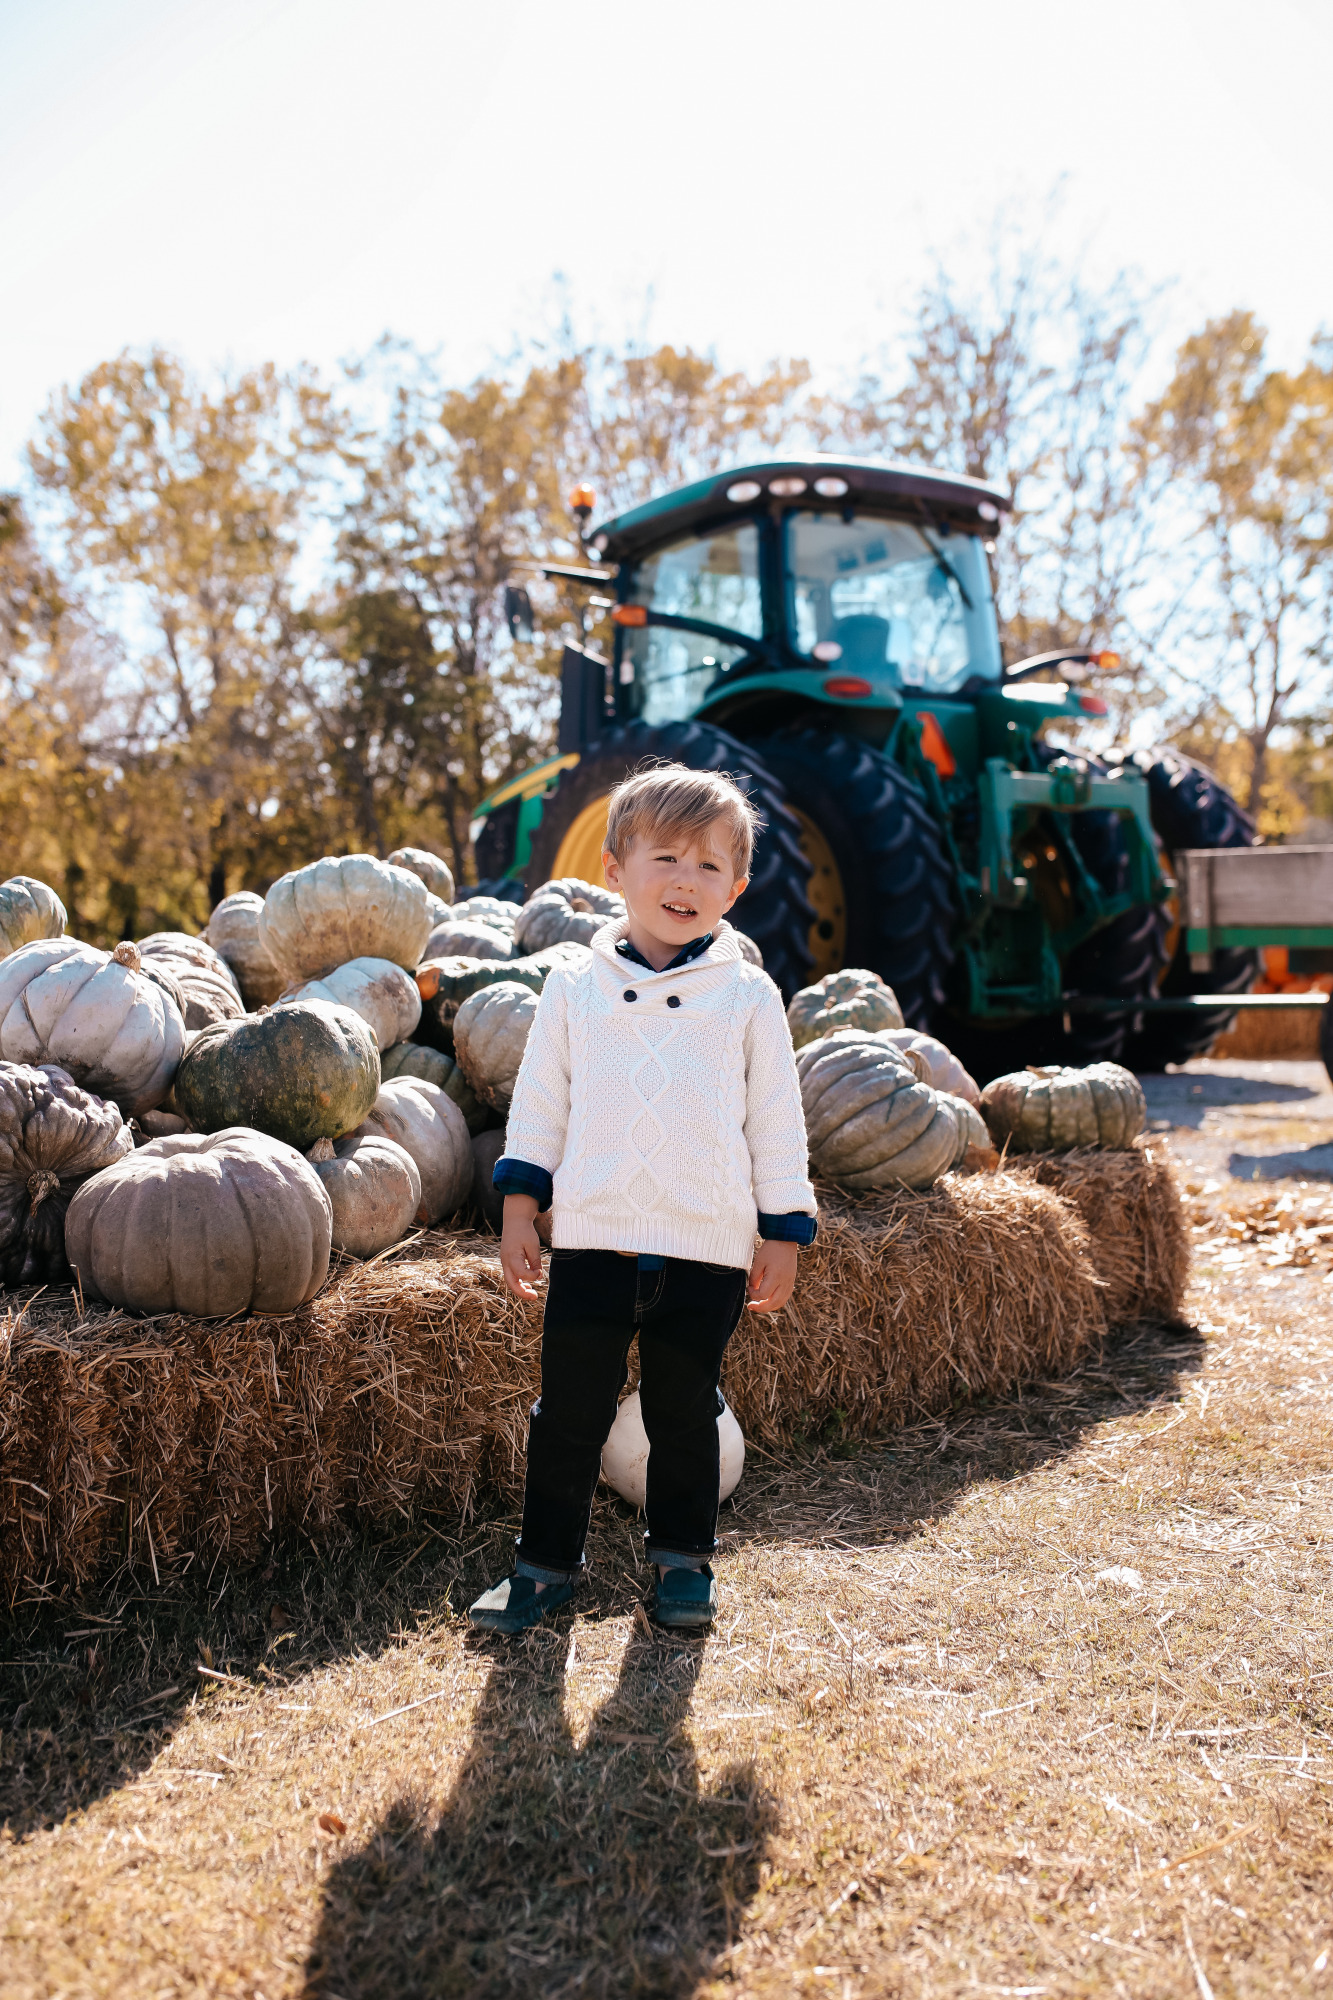 janie and jack kids clothing fall 2020, kids fall fashion 2020, the sweetest thing blog17 |janie and jack kids clothing fall 2020, kids fall fashion 2020, the sweetest thing blog17 | Janie and Jack Kids Clothing by popular US fashion blog, The Sweetest Thing: image of two kids sitting next to a pile of pumpkins and wearing a Janie and Jack PLAID POPLIN SHIRT, Janie and Jack SHAWL COLLAR PULLOVER, Janie and Jack SLIM SELVEDGE JEAN IN MOONLIGHT INDIGO WASH, Janie and Jack LEATHER TRIM BELT, Janie and Jack ARGYLE SOCK, Janie and Jack SUEDE DRIVING SHOE, and Janie and Jack PEPLUM BOW SWEATER.